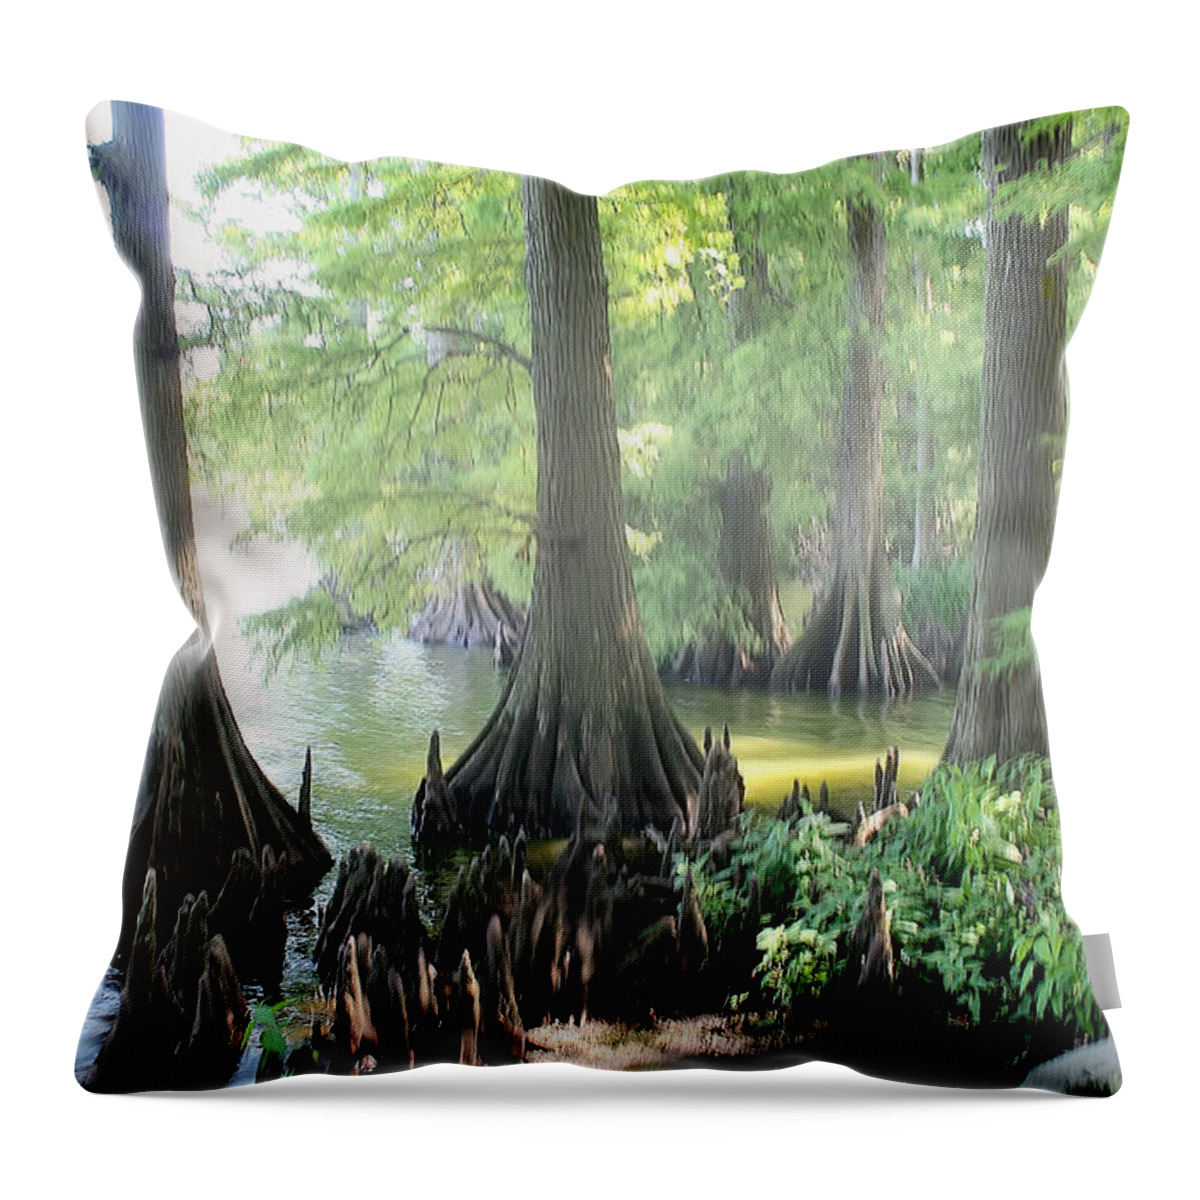 Reelfoot Lake Throw Pillow featuring the photograph Foggy Reelfoot Lake by Bonnie Willis